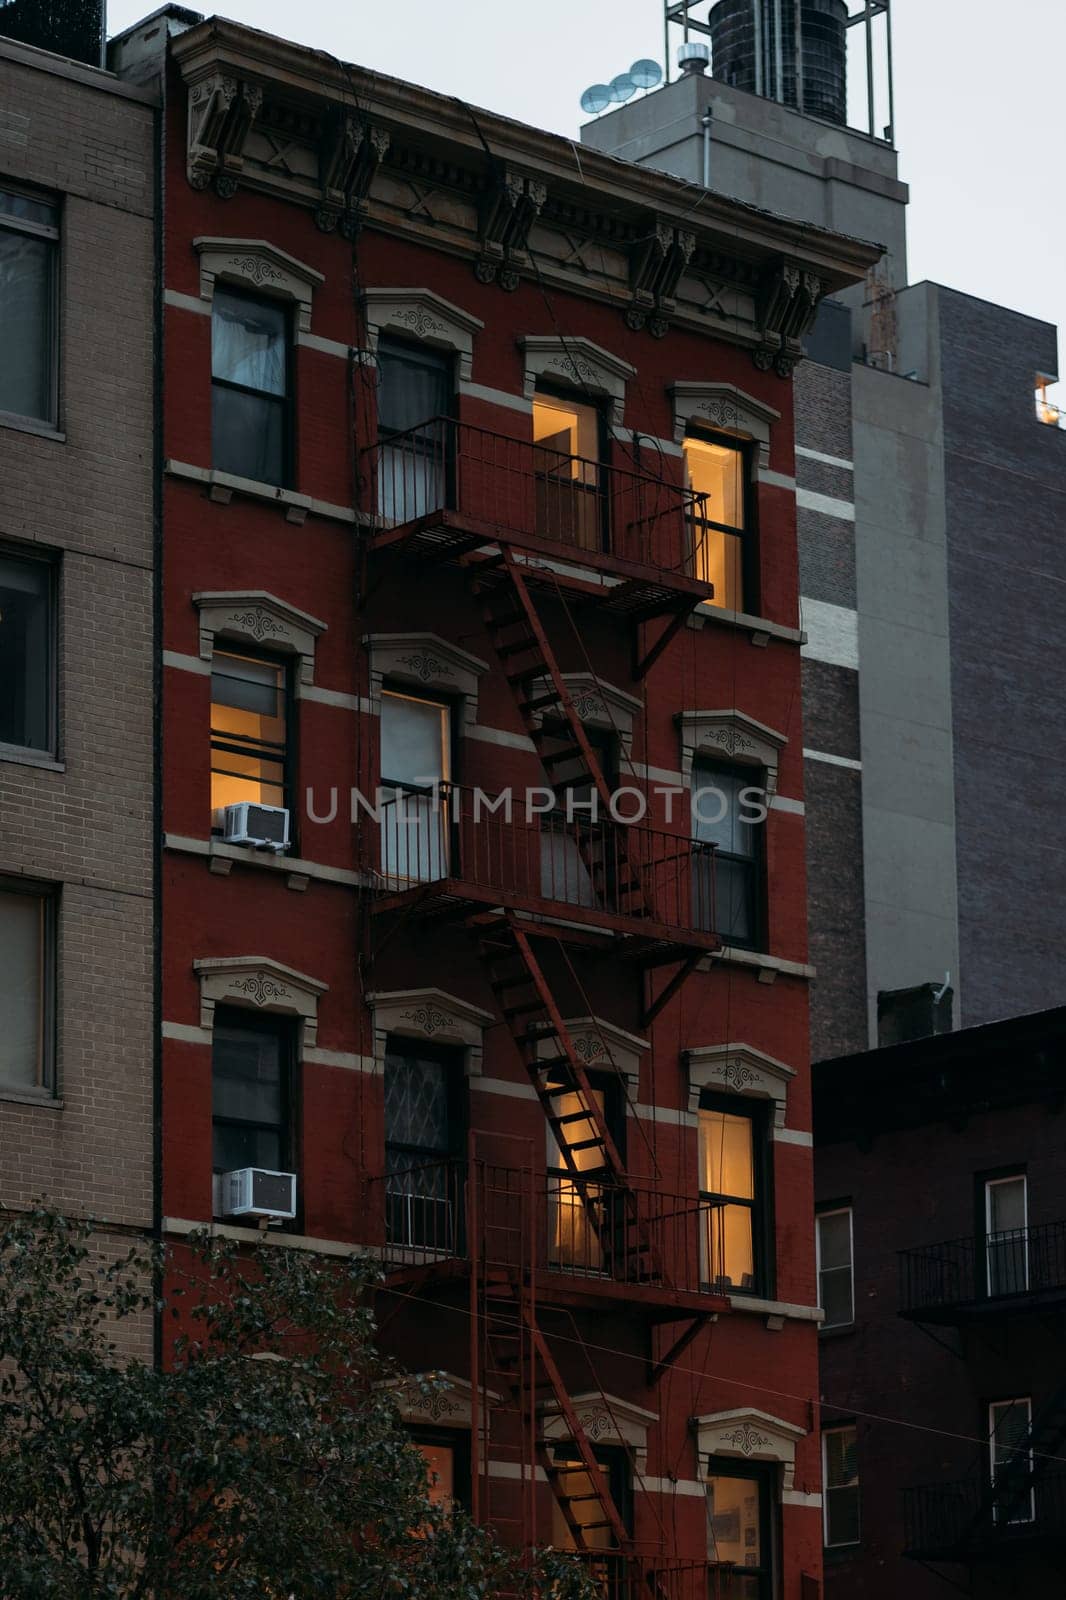 Warmly Lit Windows of a Red Brick New York Building at Dusk by apavlin